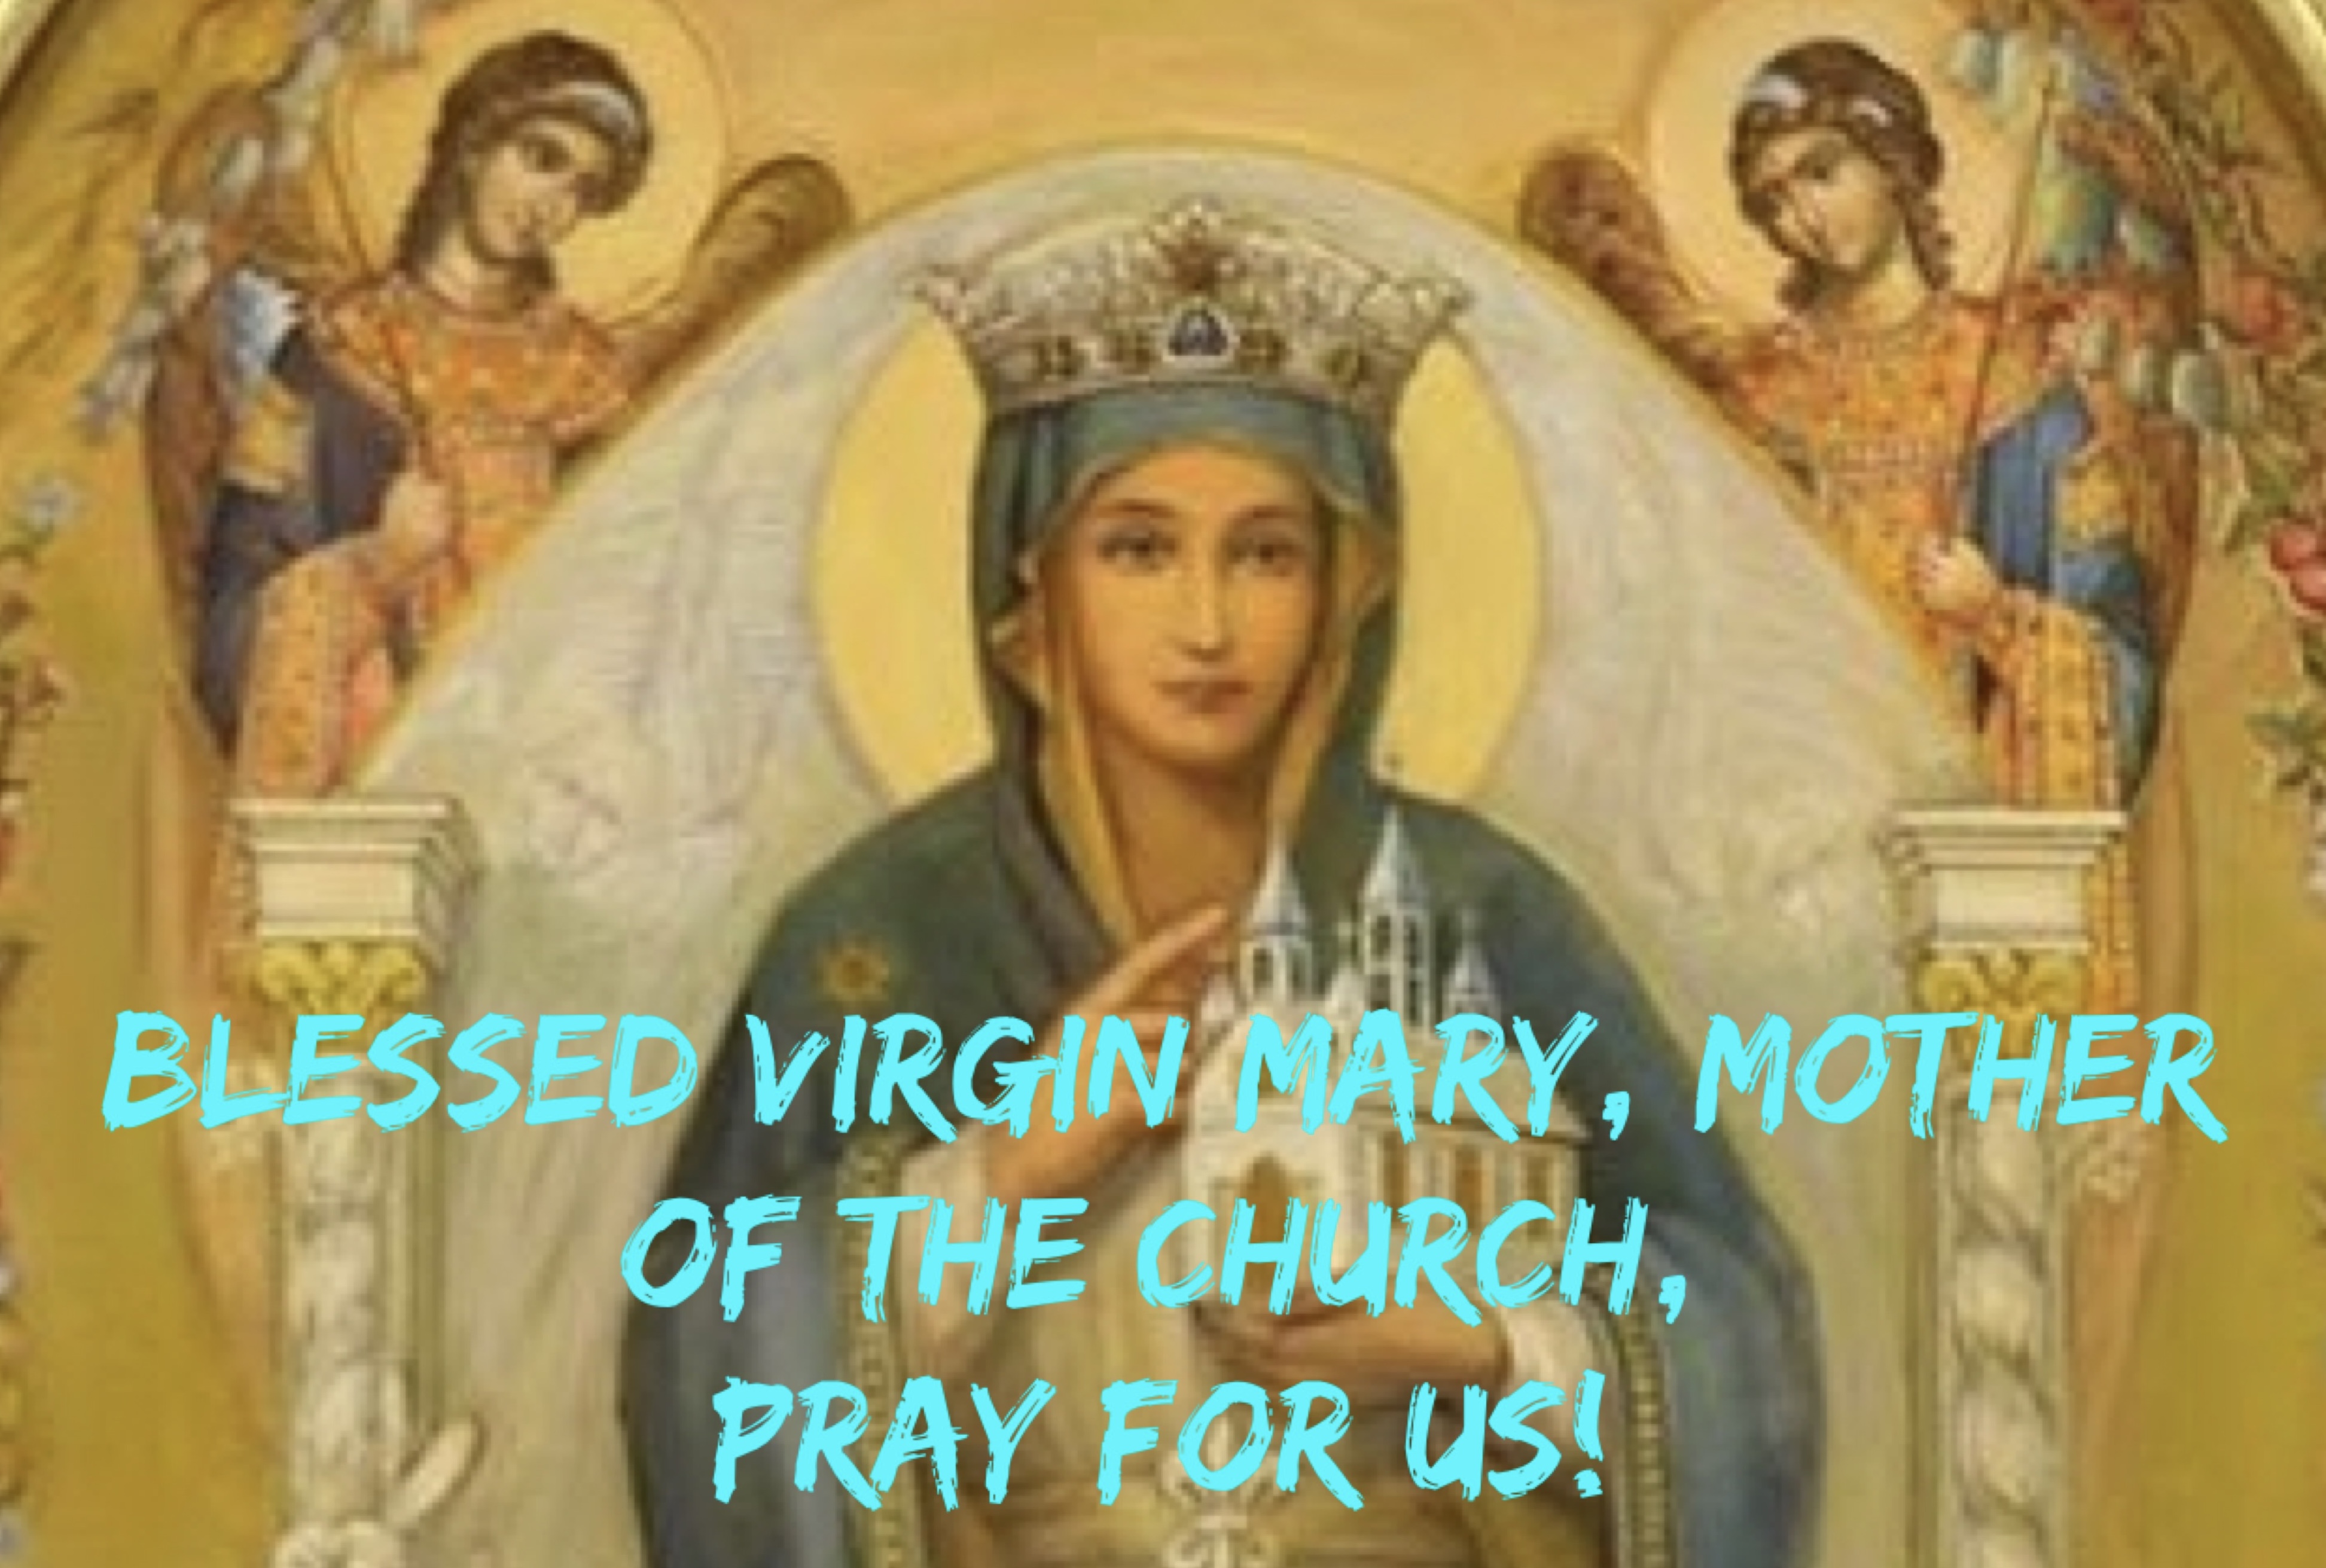 20th May - Blessed Virgin Mary, Mother of the Church